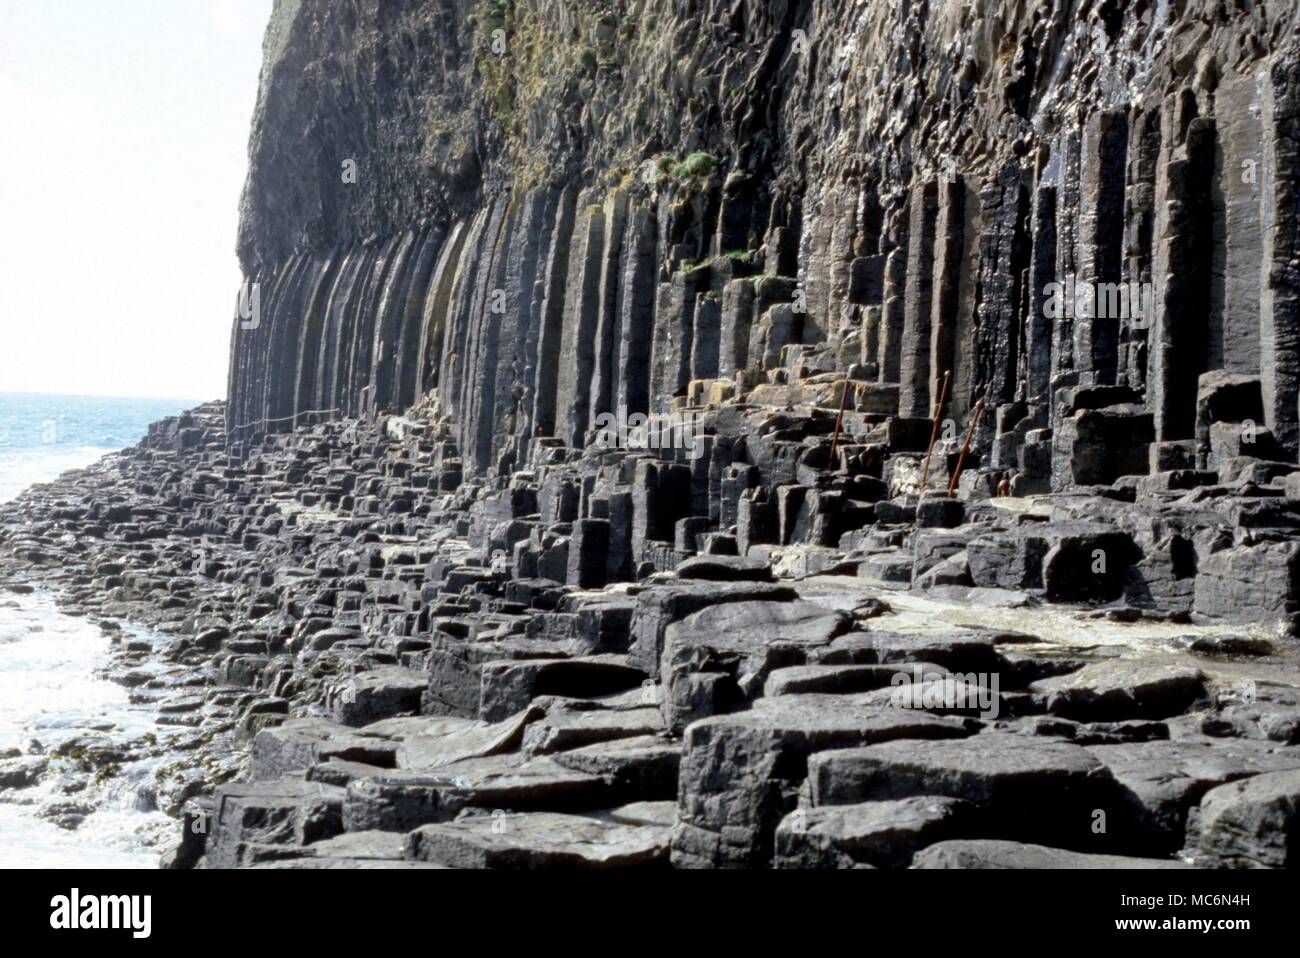 Staffa The hexagonal basaltic columns which form the cliffs of Staffa Island and which are often believed to have carved by giants or made by the ancient magicians Stock Photo